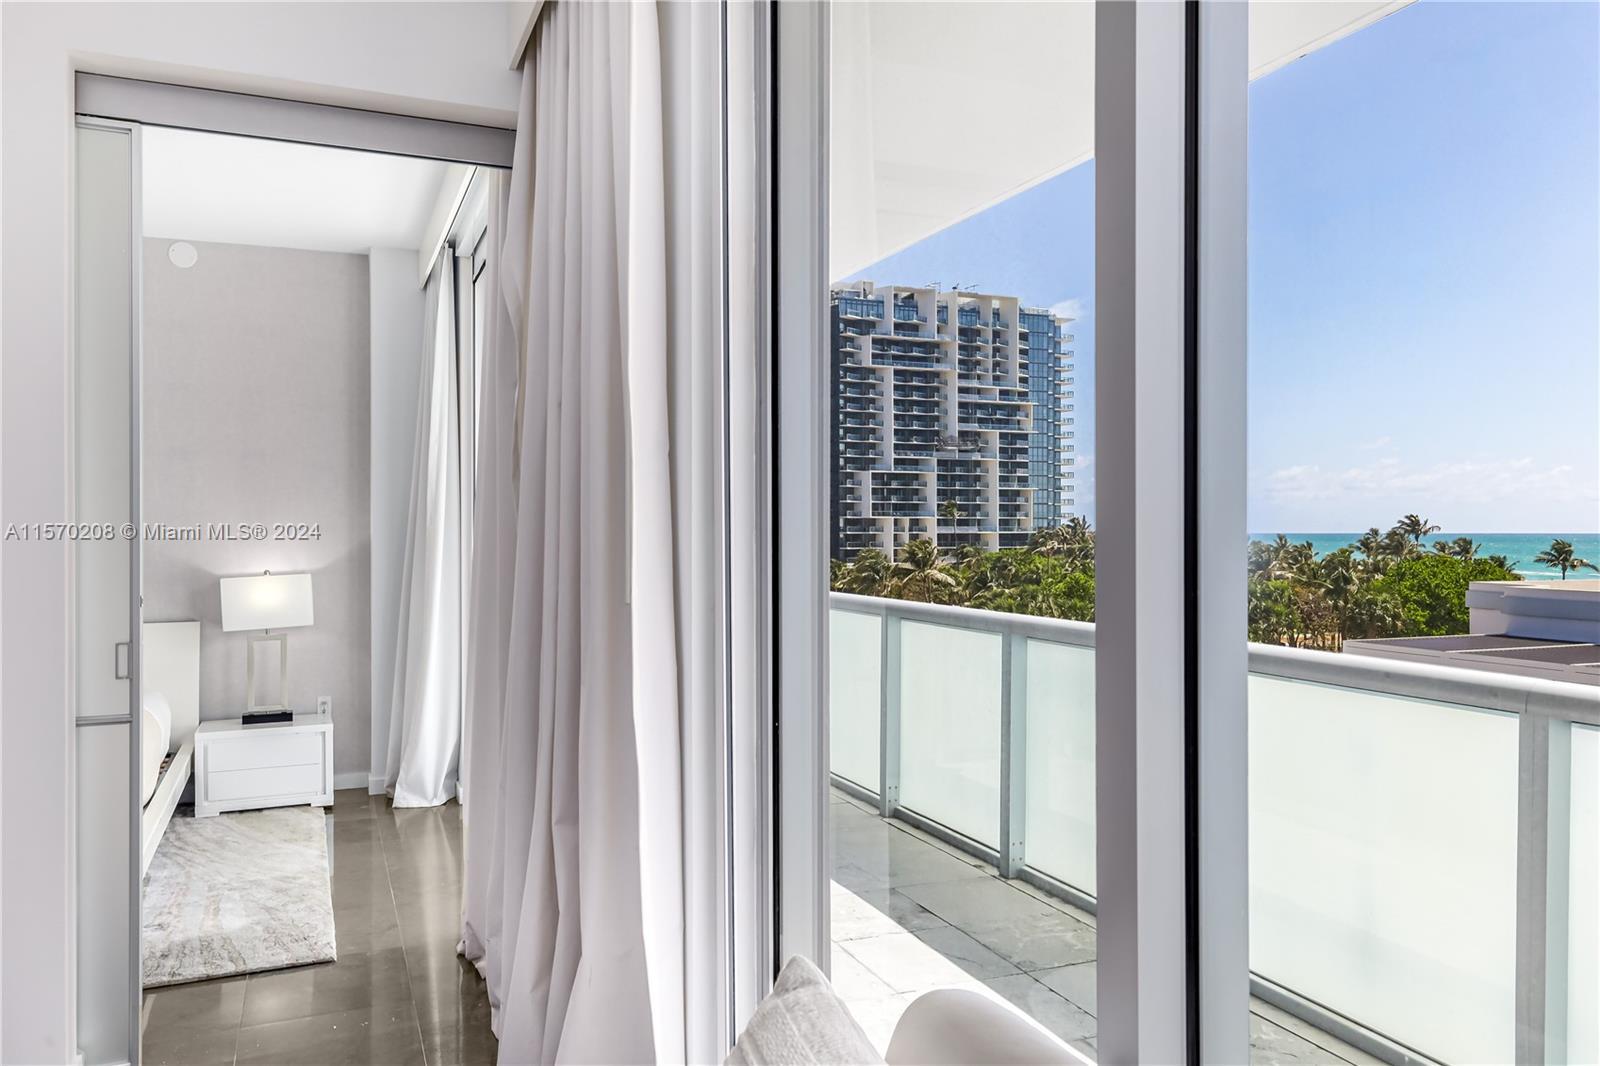 Turnkey fully furnished South Beach condo, located inside the Luxury boutique Boulan Hotel. The inte